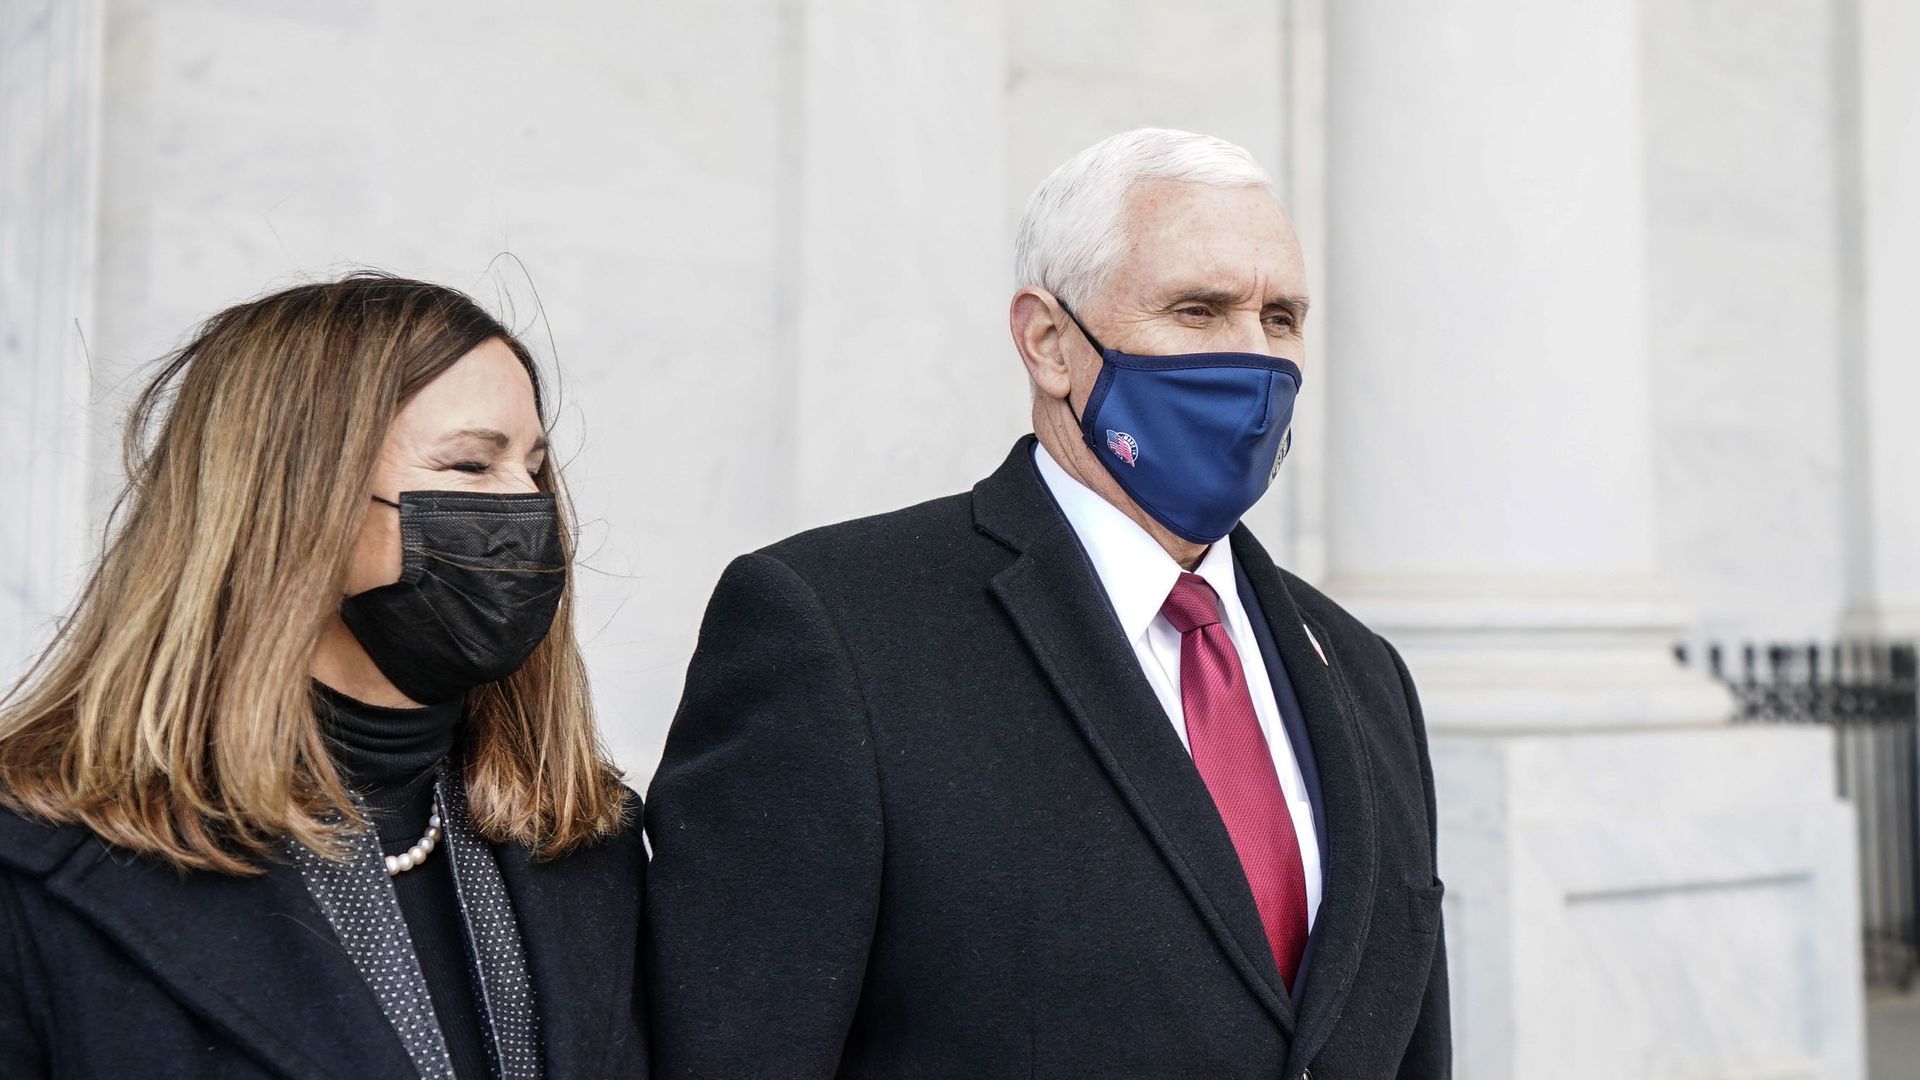 Former Vice President Mike Pence and his wife, Karen Pence, after the inauguration of President Joe Biden in January 2021.